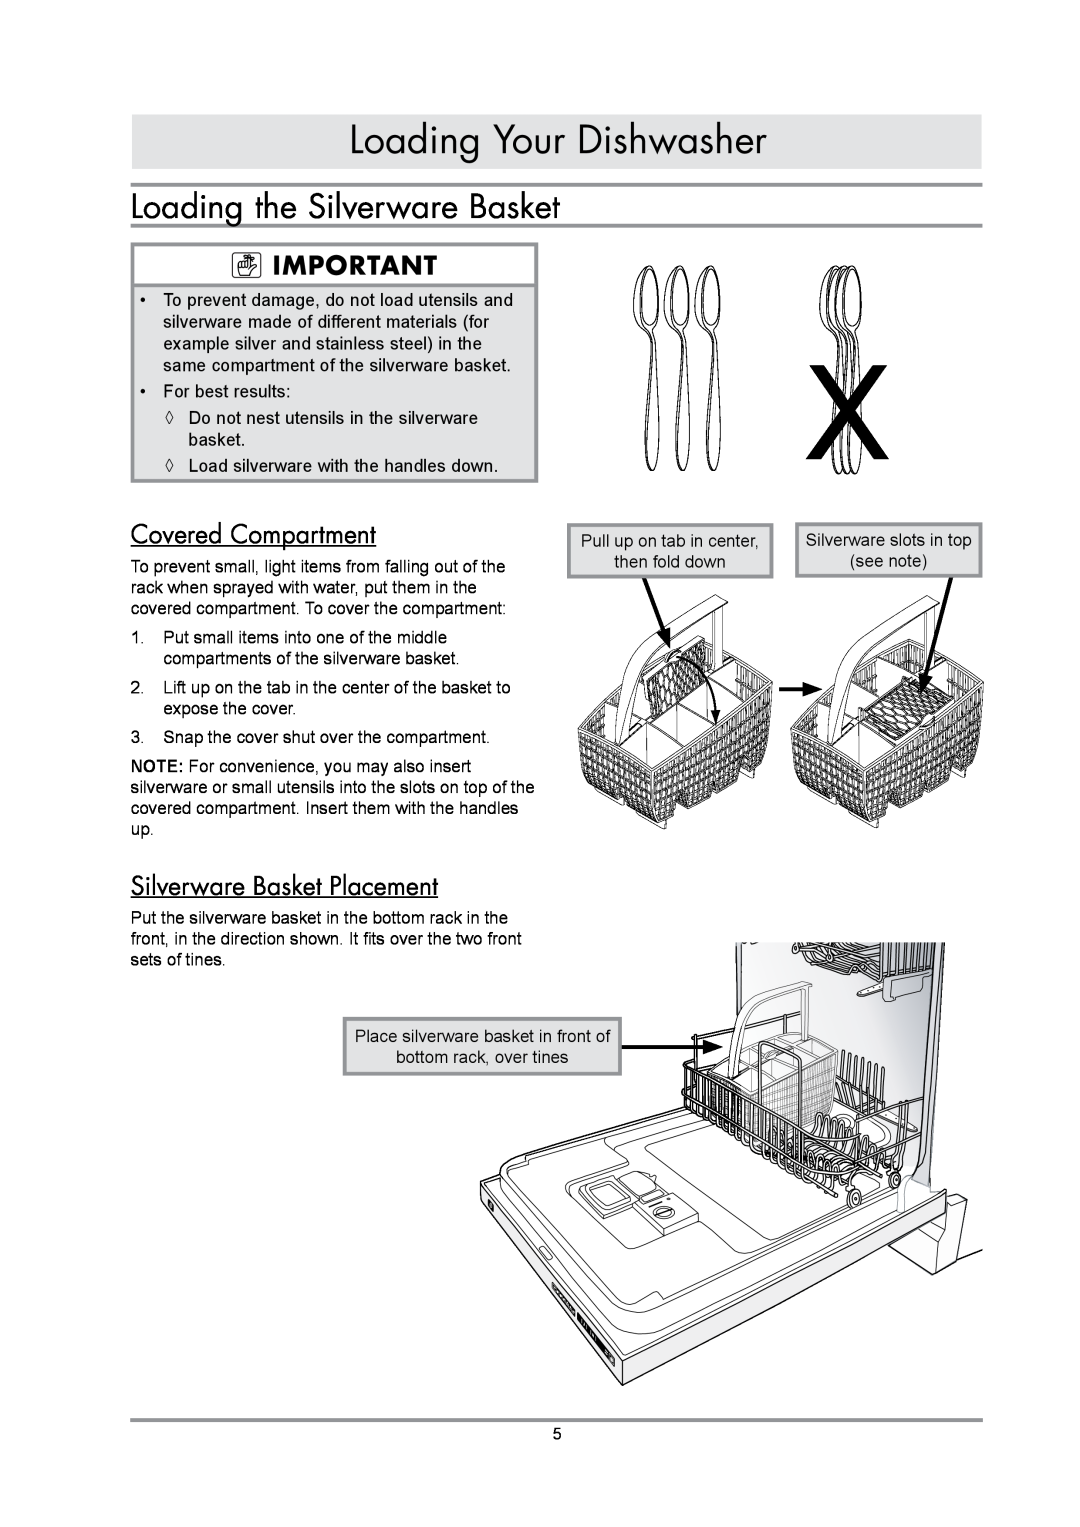 Dacor IDWH24 Loading the Silverware Basket, Covered Compartment, Silverware Basket Placement, Loading Your Dishwasher 